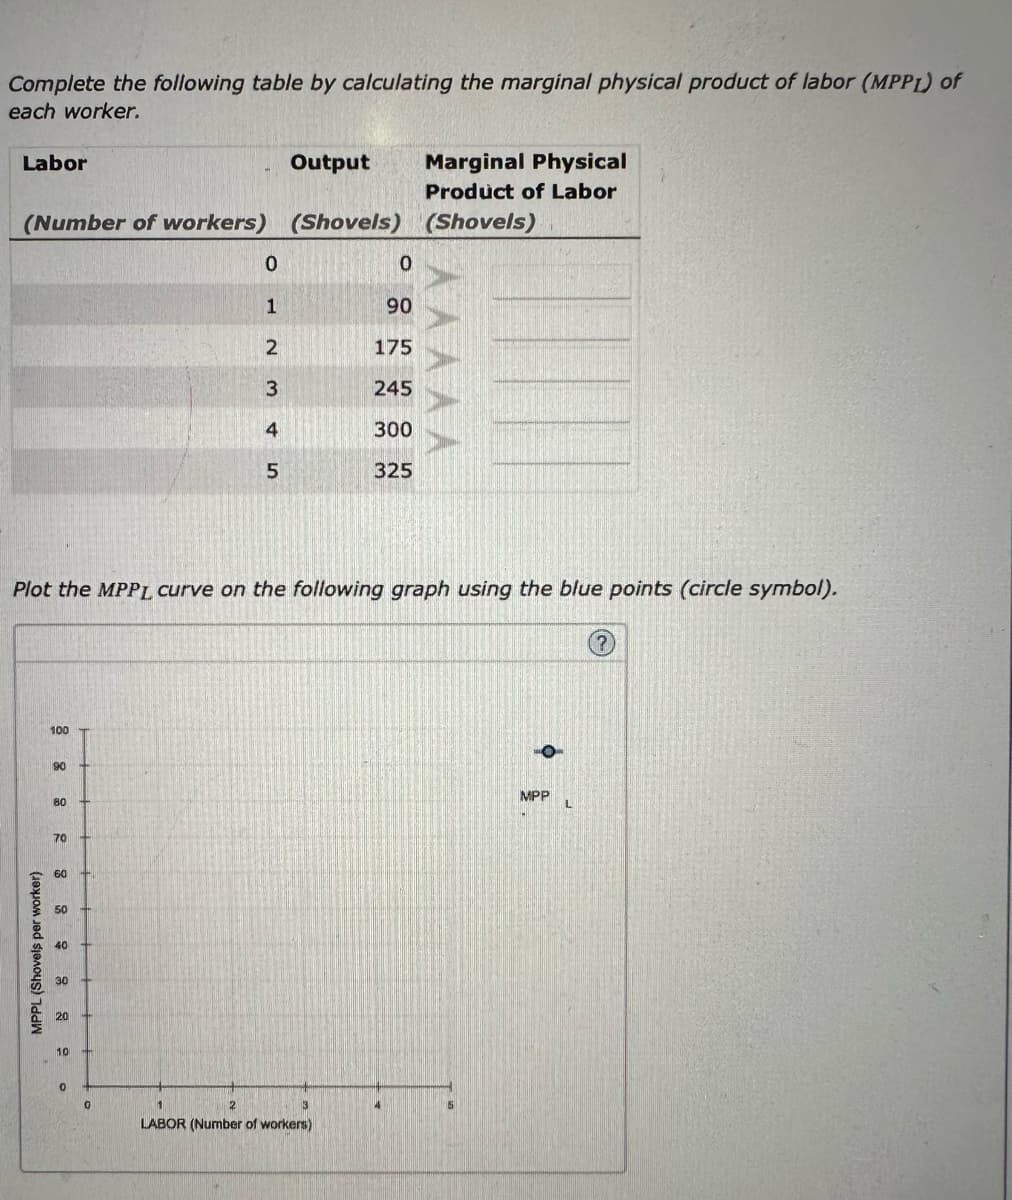 Complete the following table by calculating the marginal physical product of labor (MPPL) of
each worker.
Labor
(Number of workers) (Shovels) (Shovels)
MPPL (Shovels per worker)
100
90
80
70
Plot the MPPL curve on the following graph using the blue points (circle symbol).
60+
50 D
40
30
20
10
0
Output
0
1
2
3
4
5
0
1
2
LABOR (Number of workers)
3
0
90
175
245
300
325
Marginal Physical
Product of Labor
14
ΑΛΛΛΑ
MPP
L
(?)